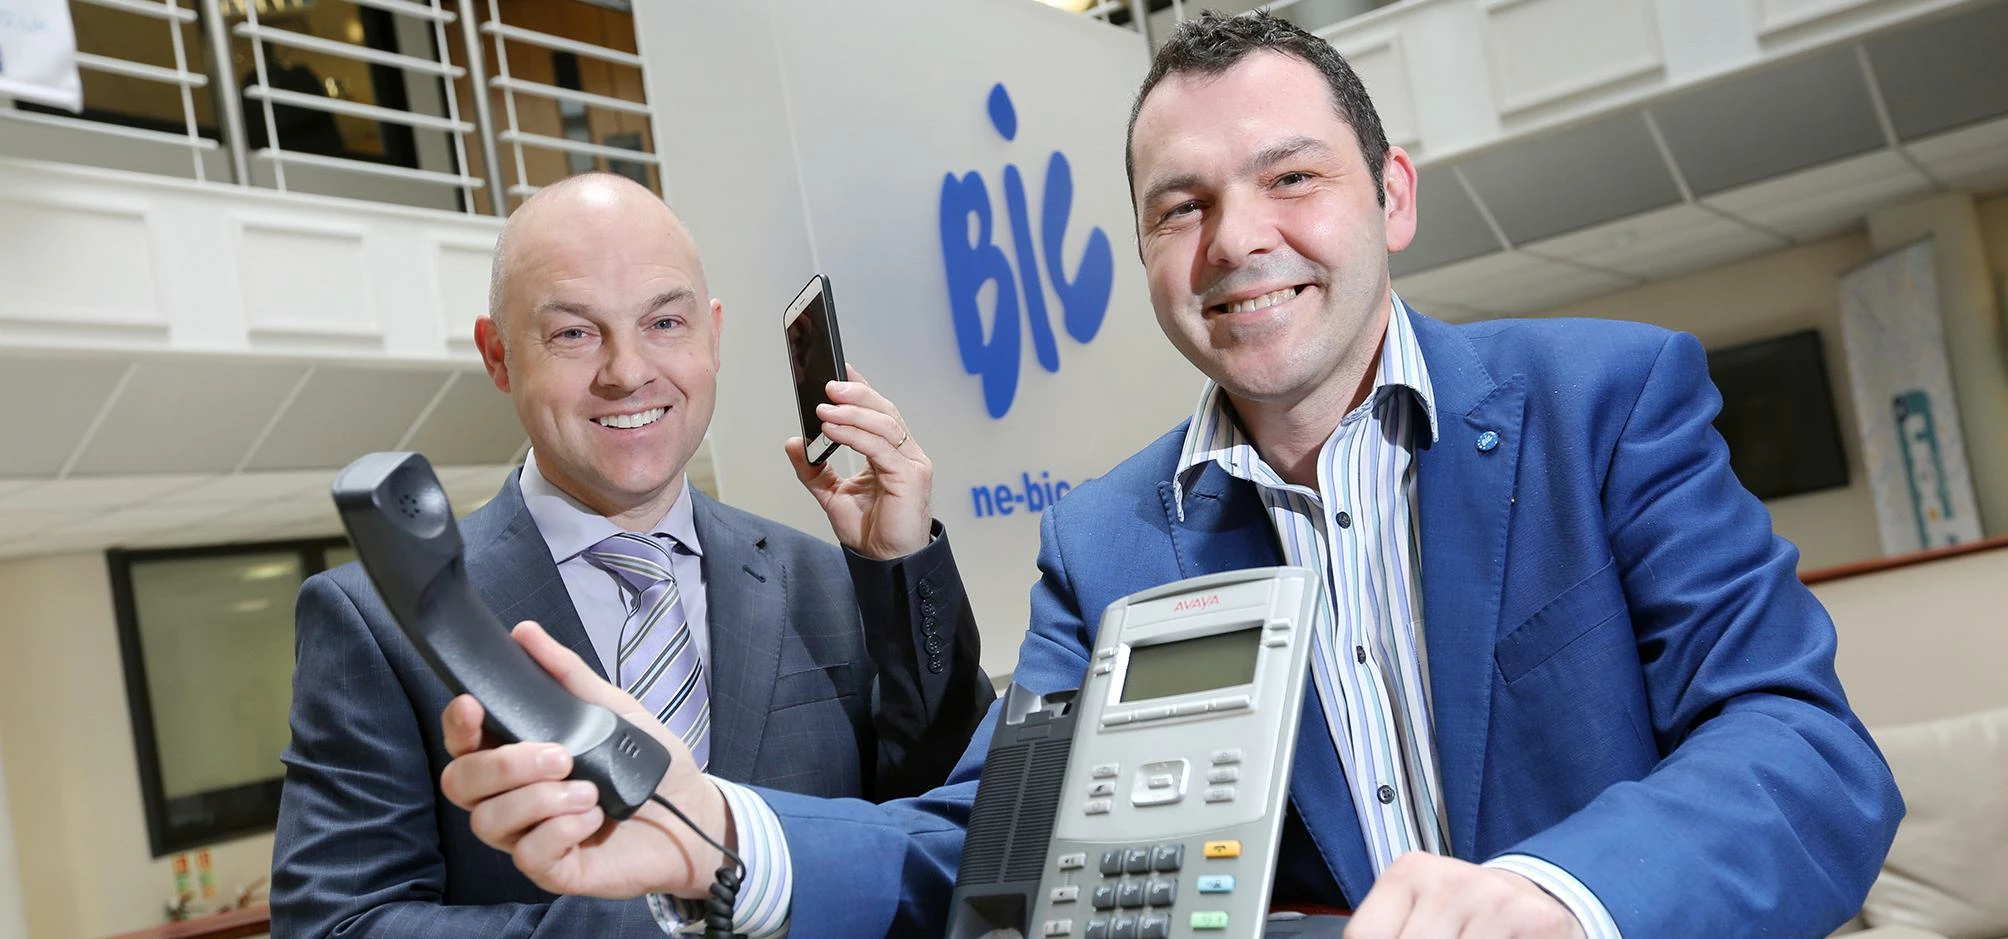 Paul McEldon, Chief Executive of the BIC (right) and Keith Rowe at the launch of BIC Telecom